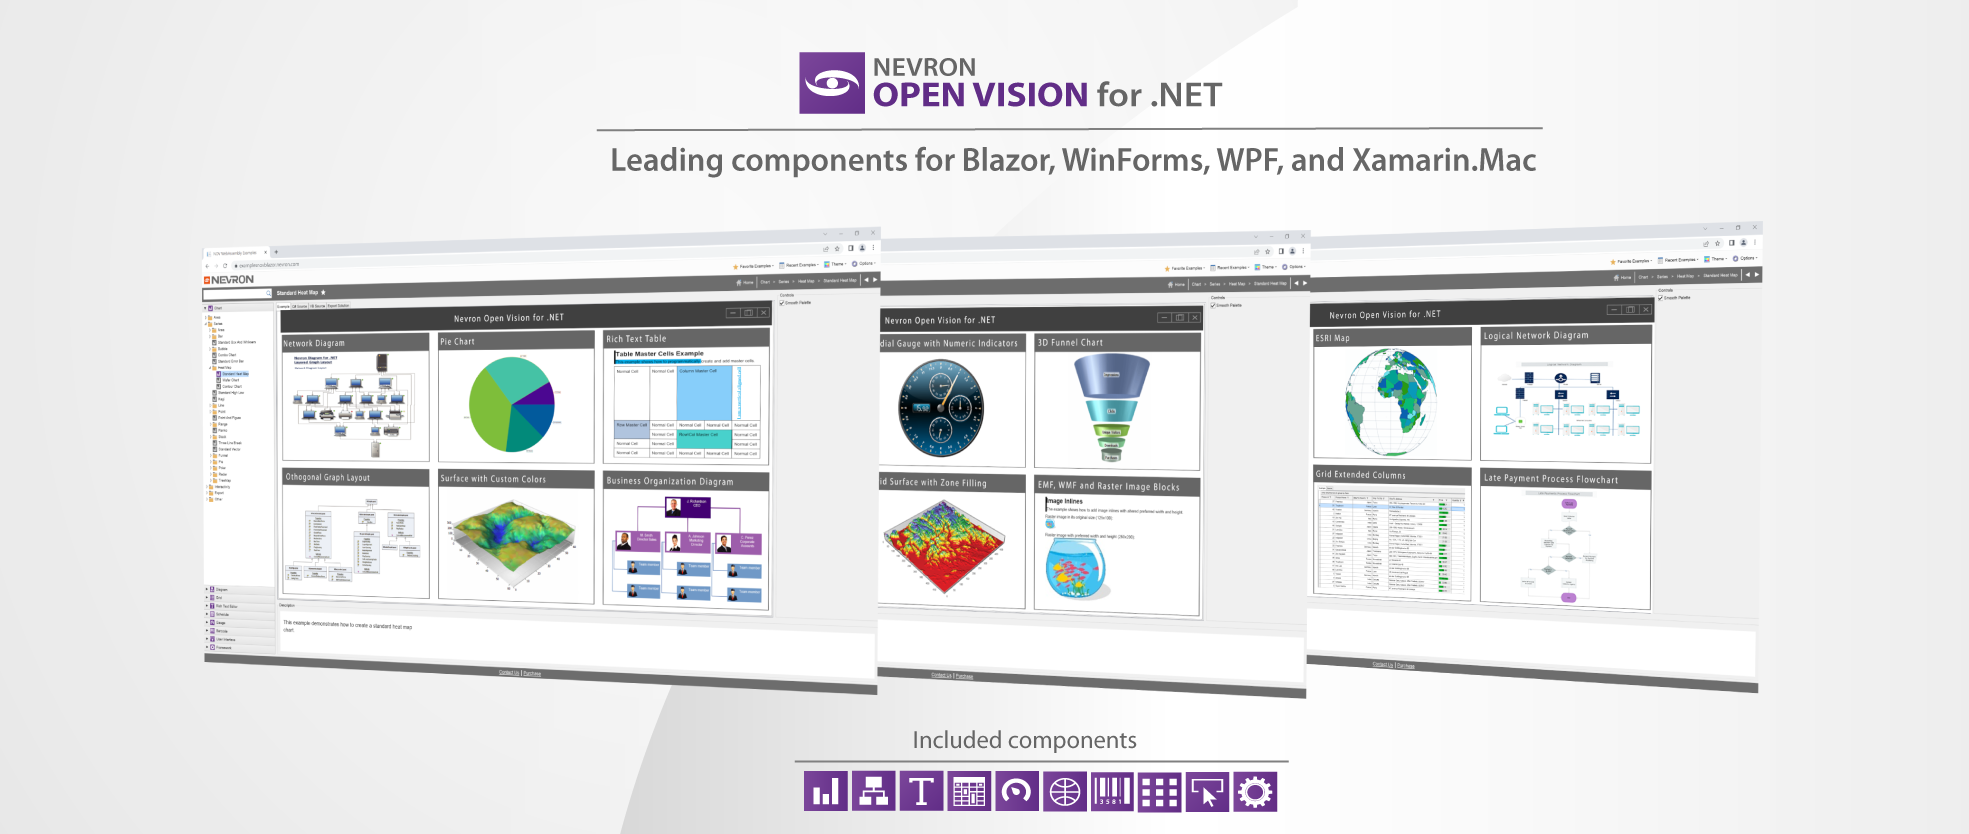 Nevron Open Vision for .NET v2022.2 is Now Available